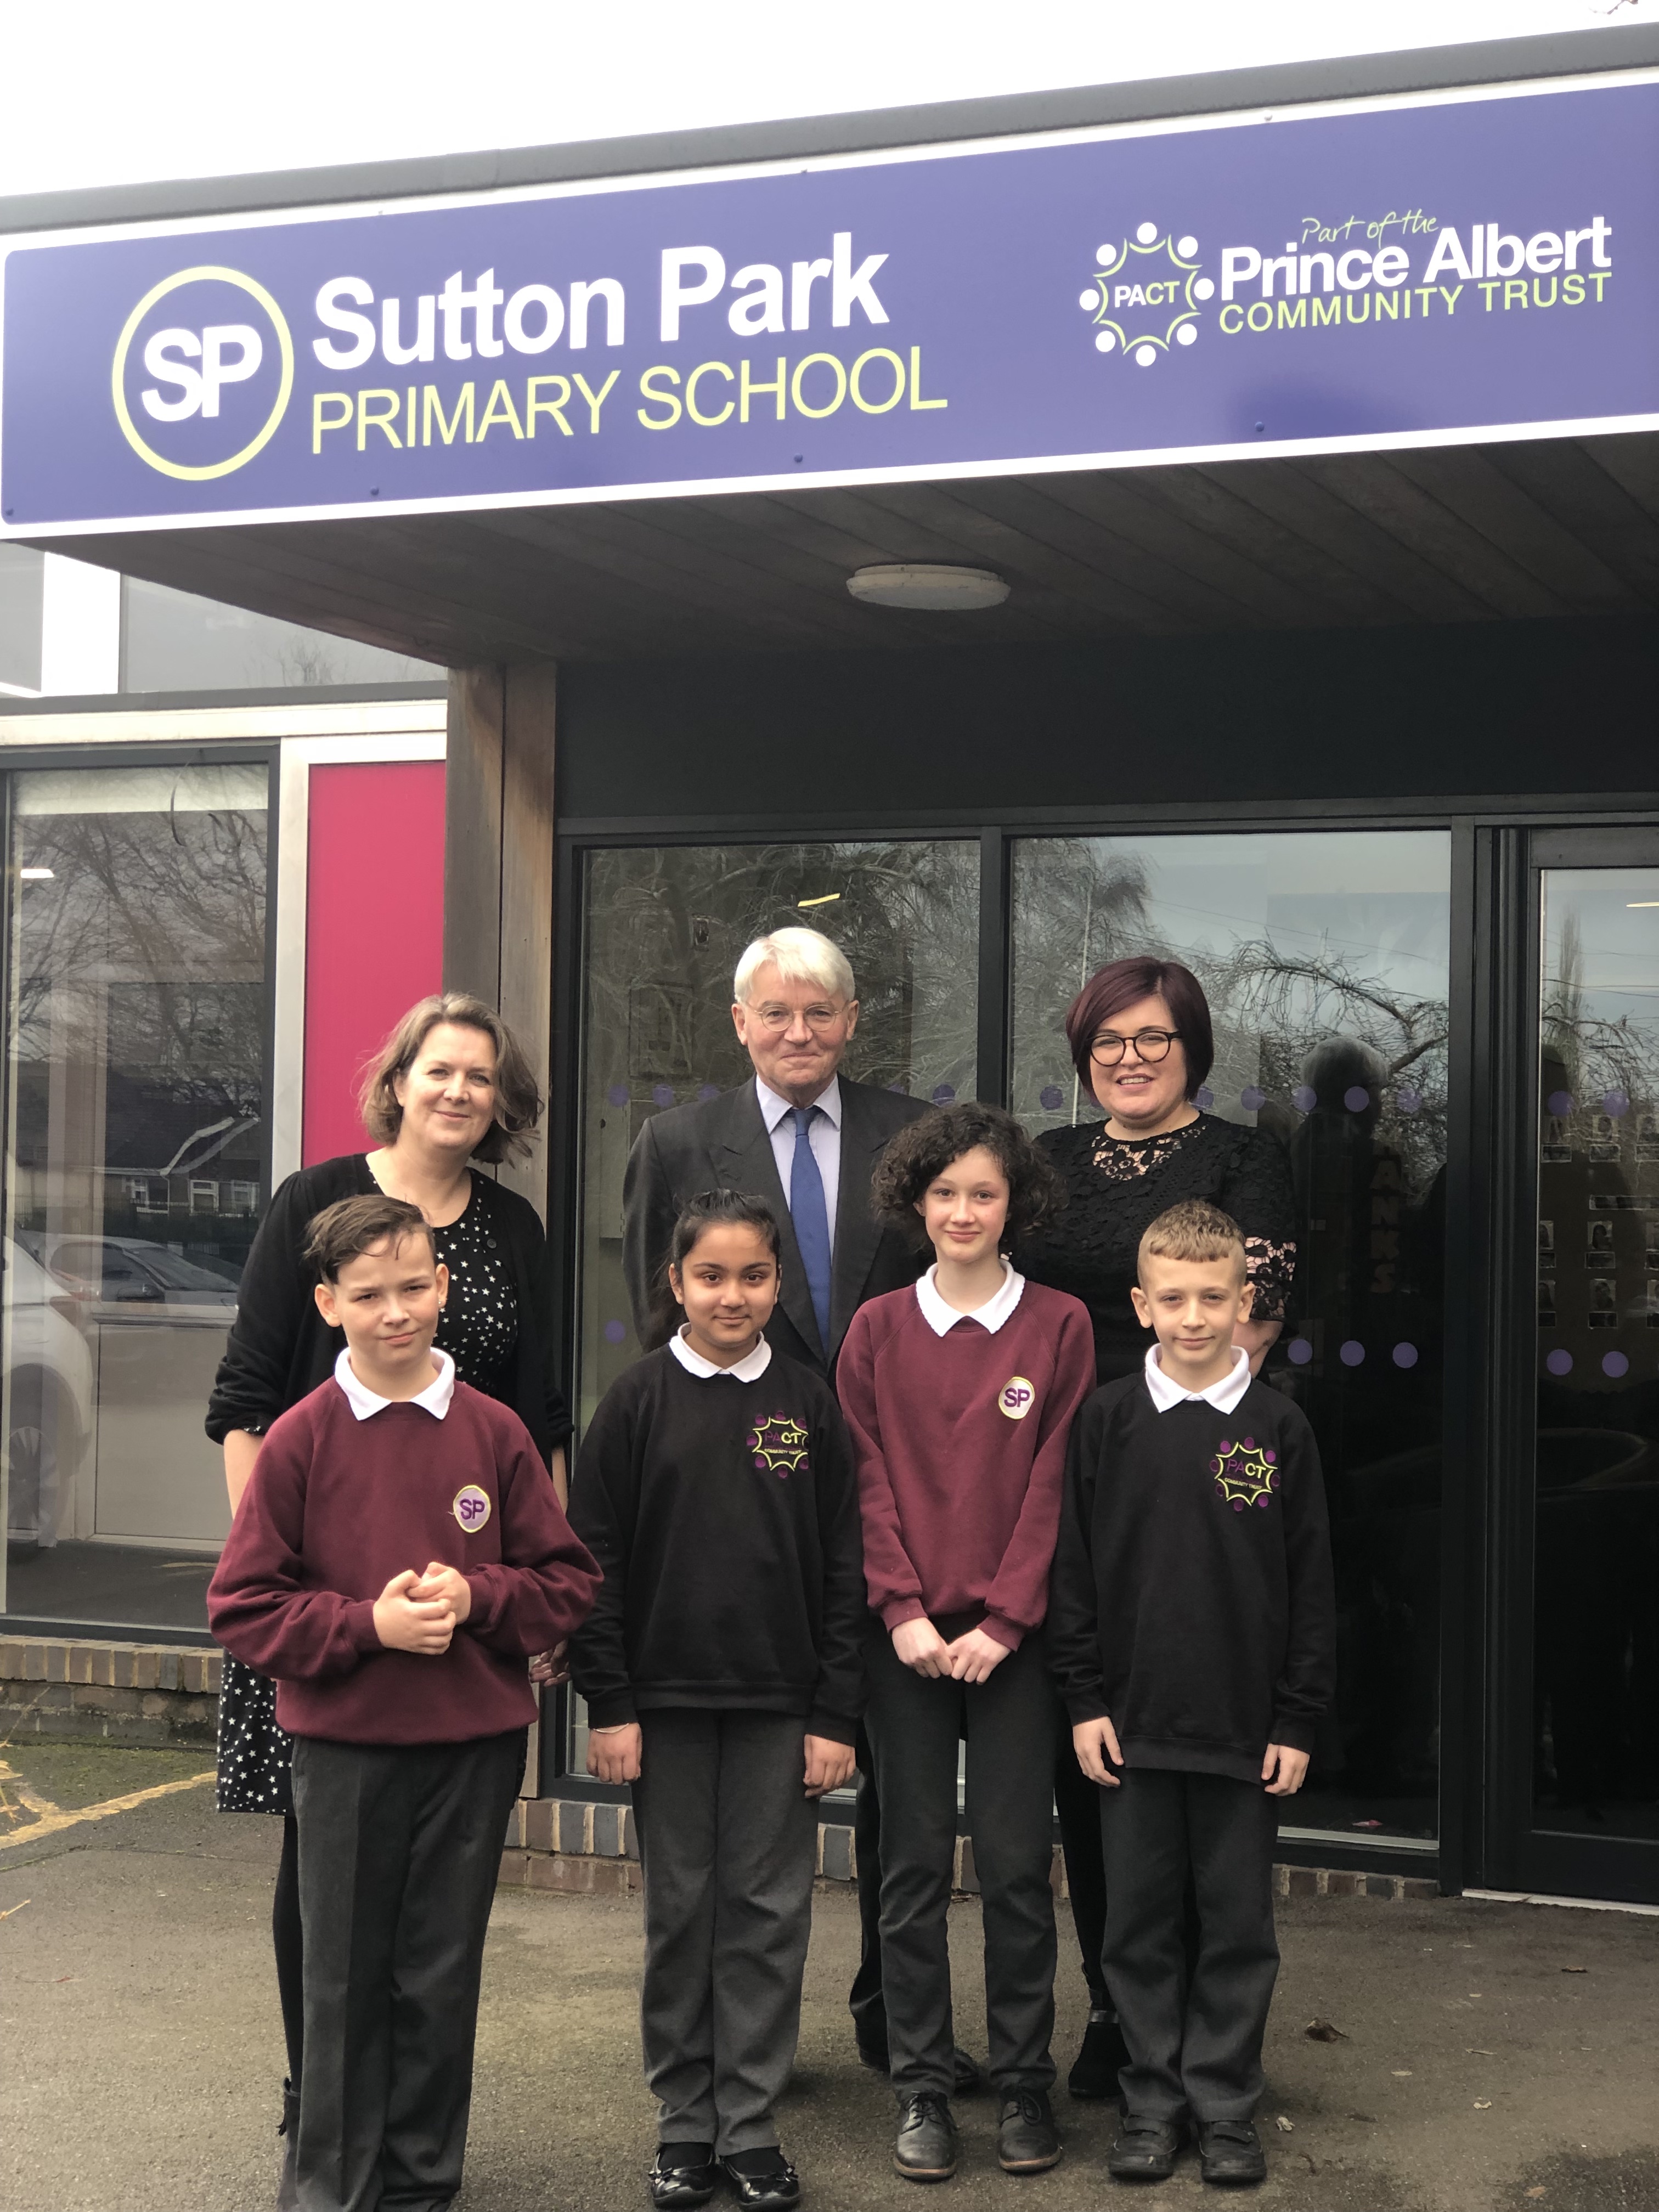 Sutton Park Primary set to receive substantial redevelopment